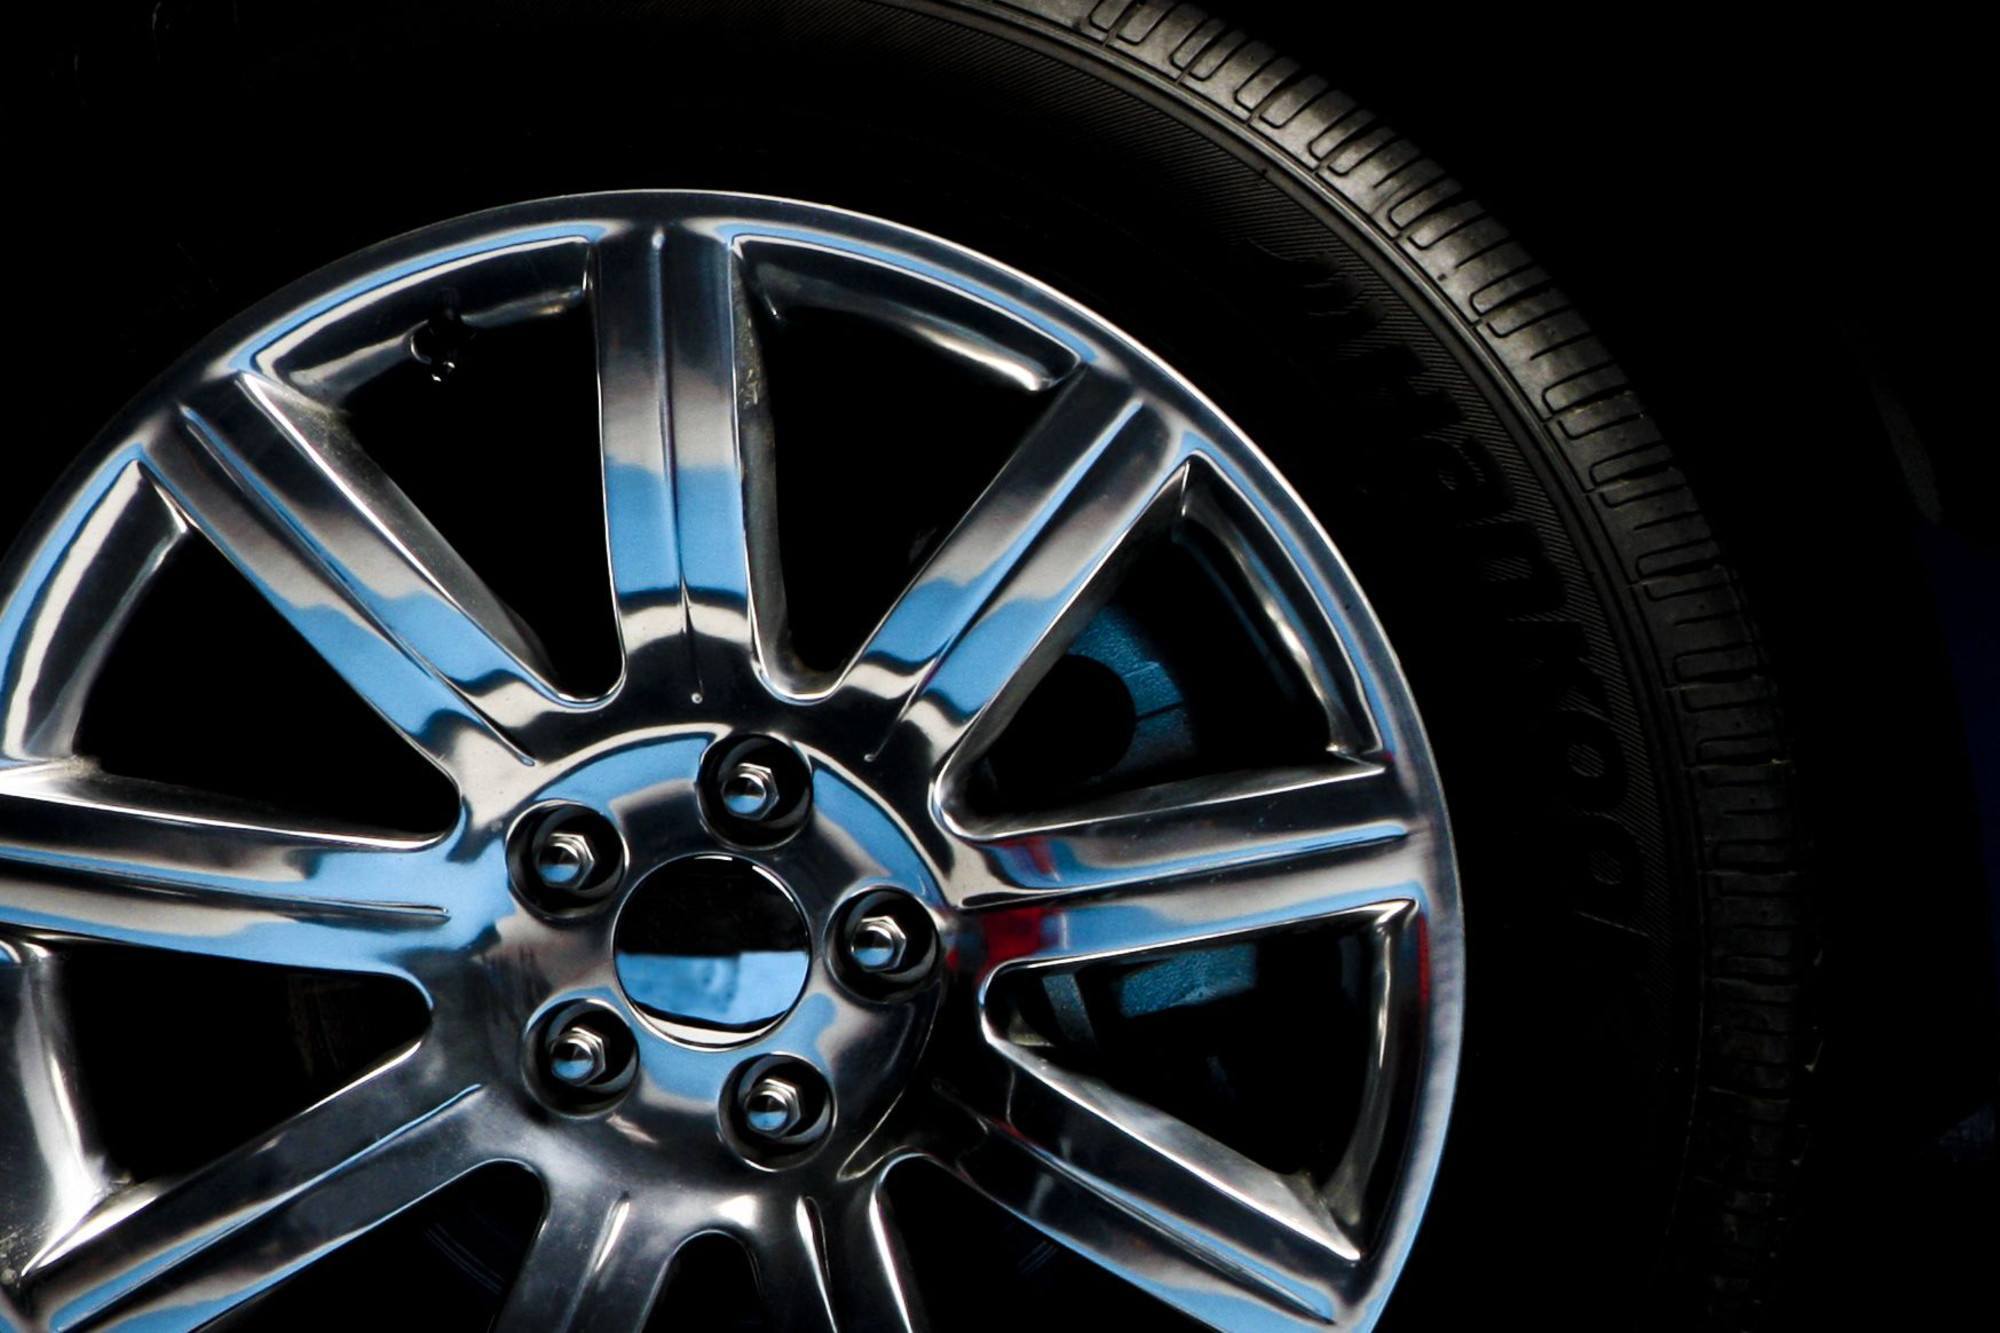 Tire Buying Guide: How to Choose Tires - Now from Nationwide